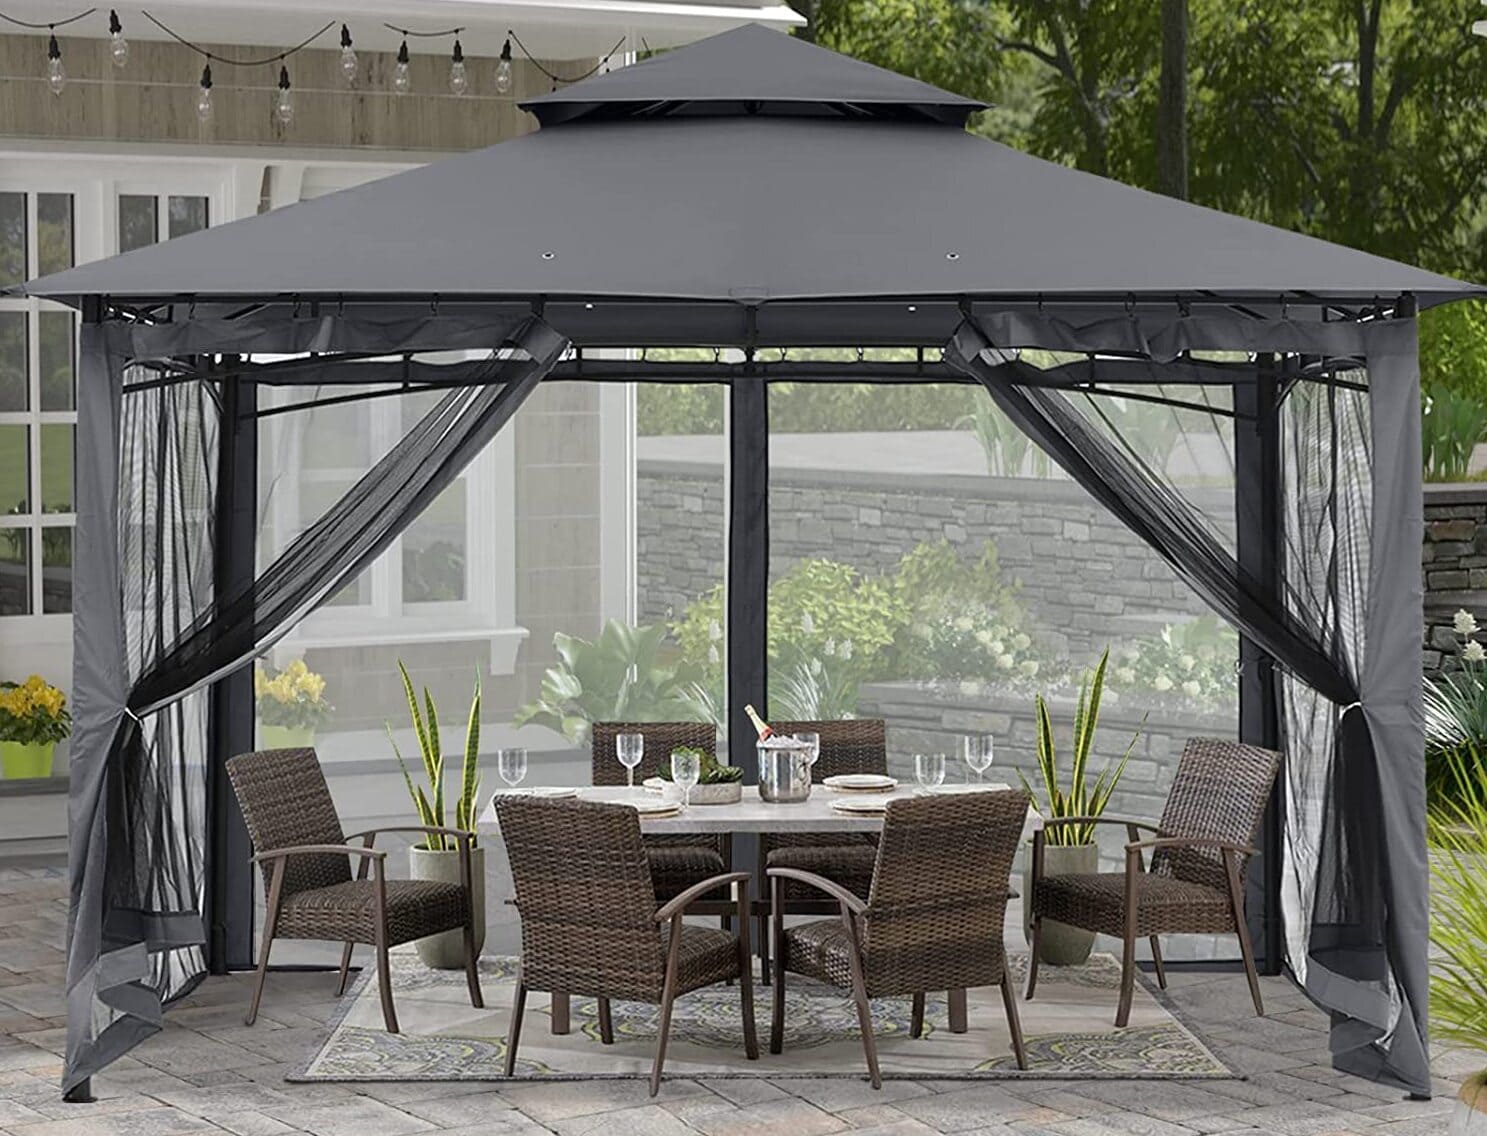 How to Anchor a Gazebo to Pavers: A Step-by-Step Guide.